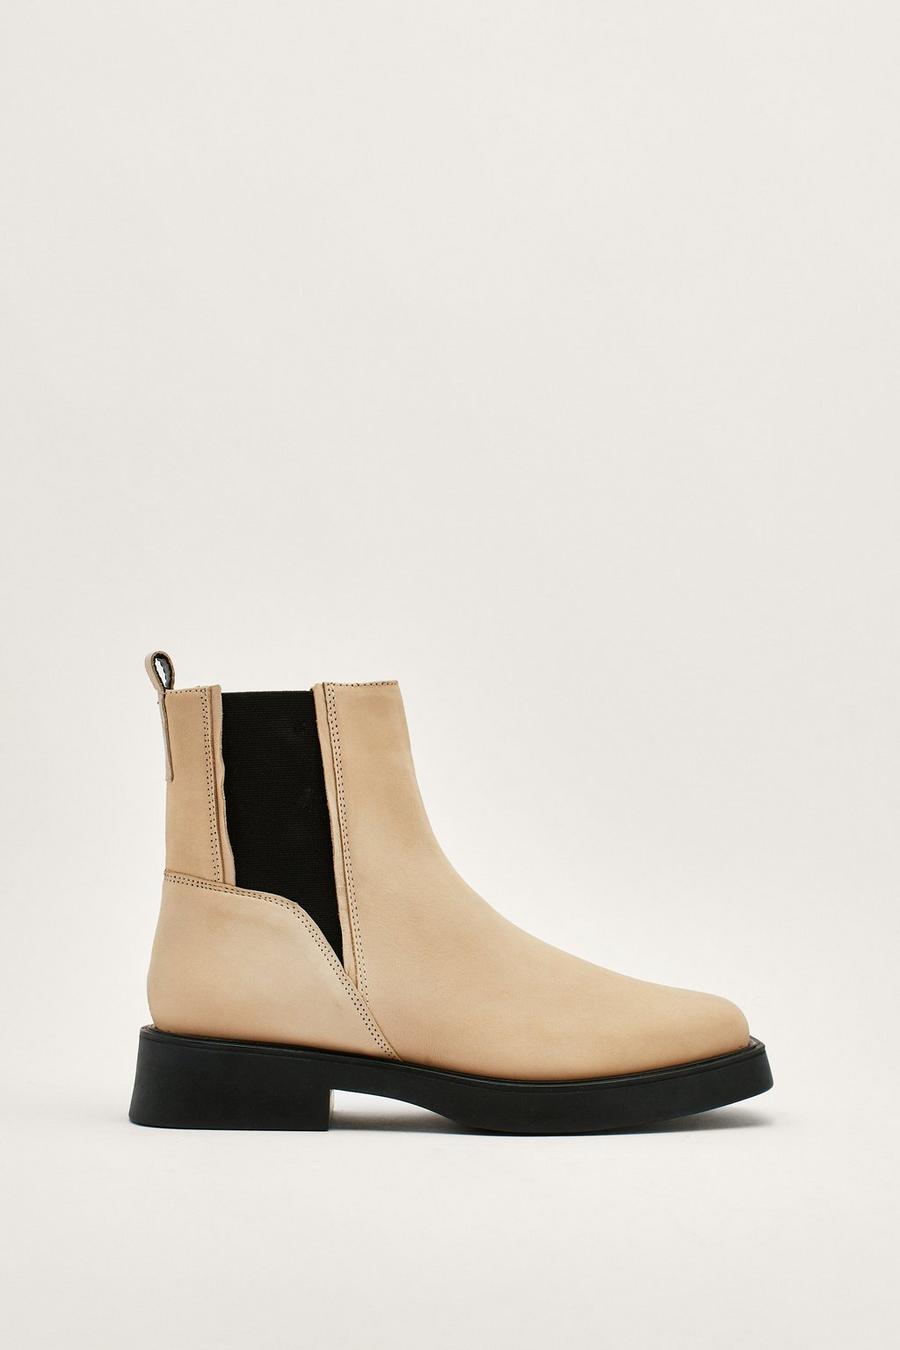 Leather Square Toe Chelsea Boots